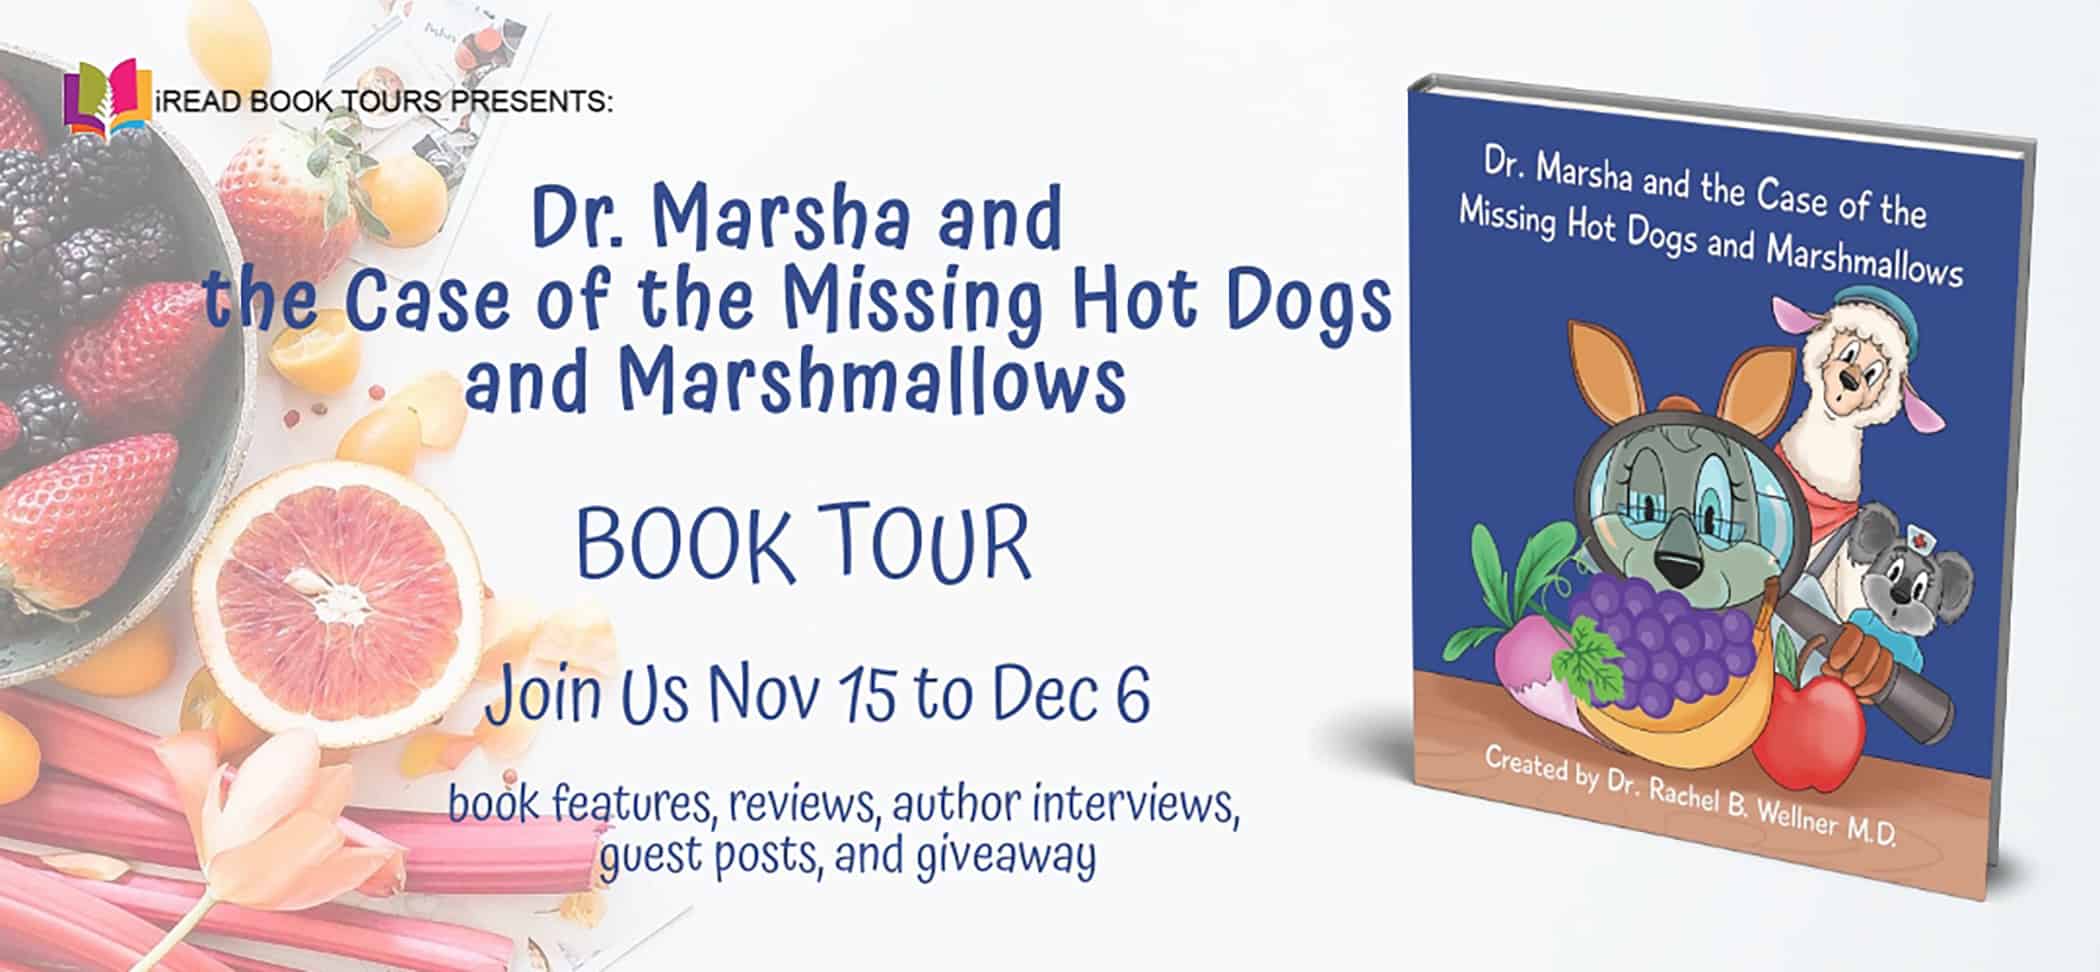 Dr. Marsha and the Case of the Missing Hot Dogs and Marshmallows by Dr. Rachel B. Wellner | $50 Gift Card Giveaway + Books, Interview, & Review